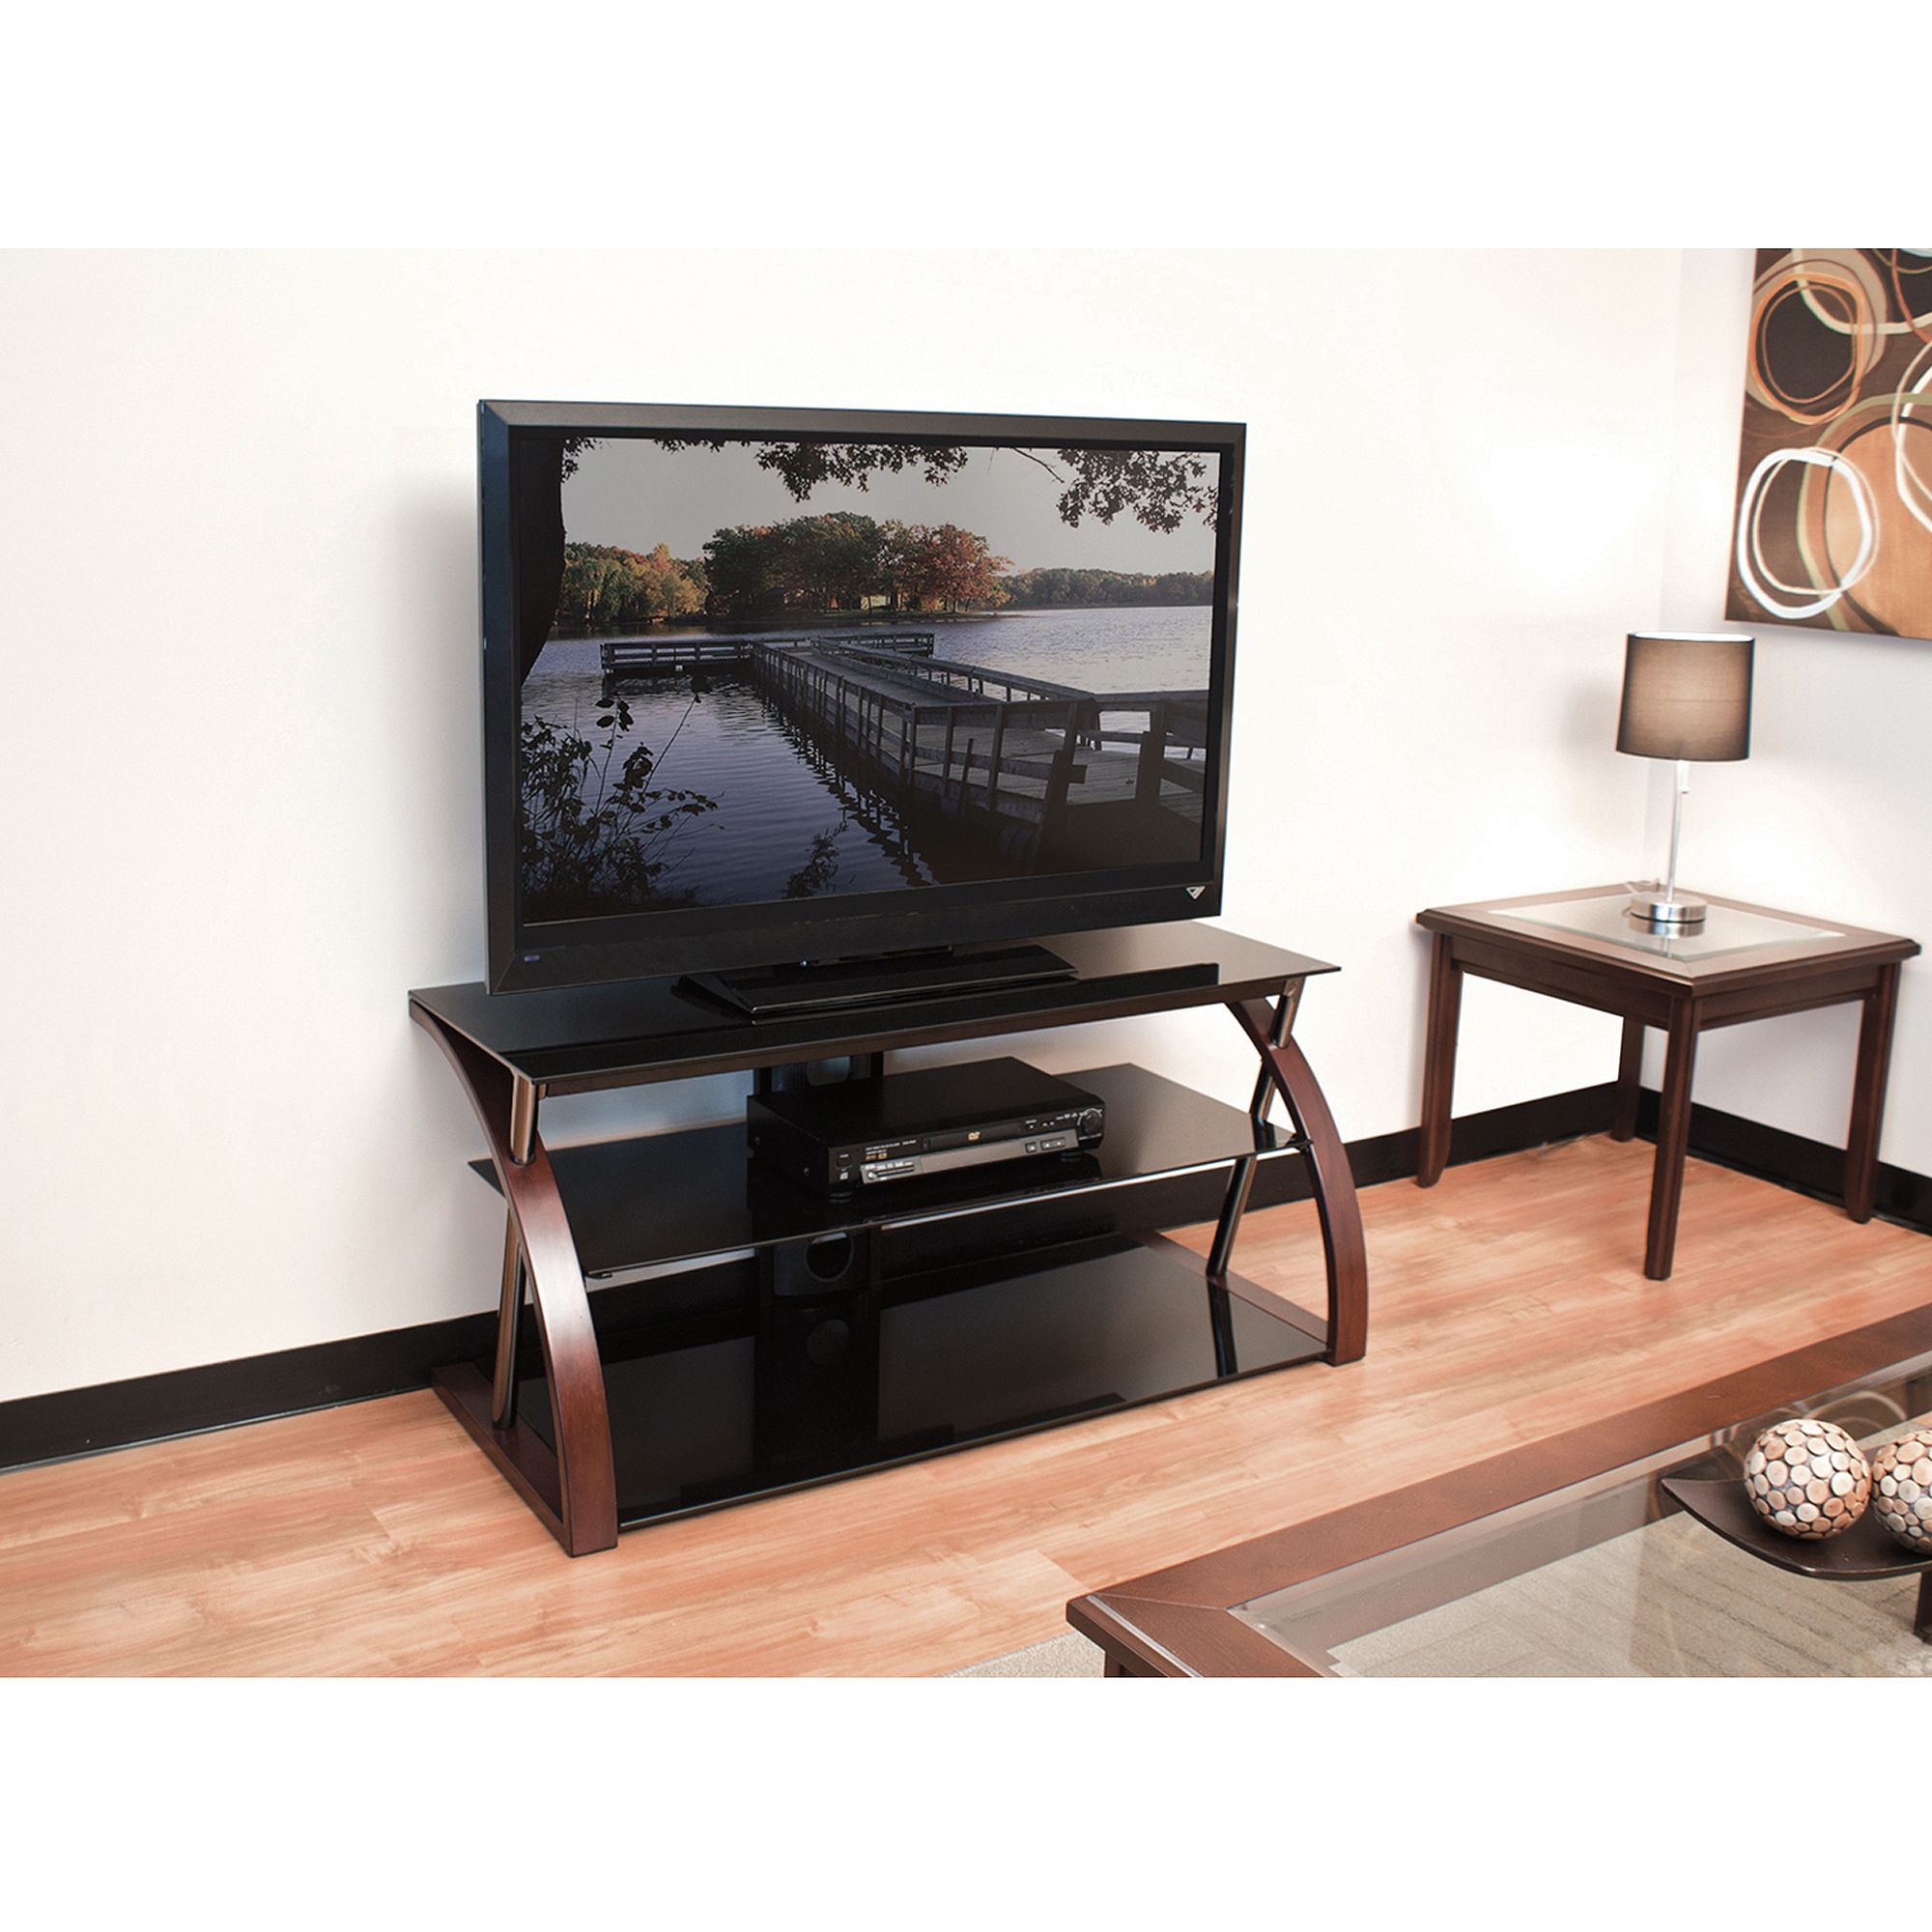 Techcraft 48" Wood, Metal And Glass Tv Stand For Tvs Up To With Spellman Tv Stands For Tvs Up To 55" (View 13 of 15)